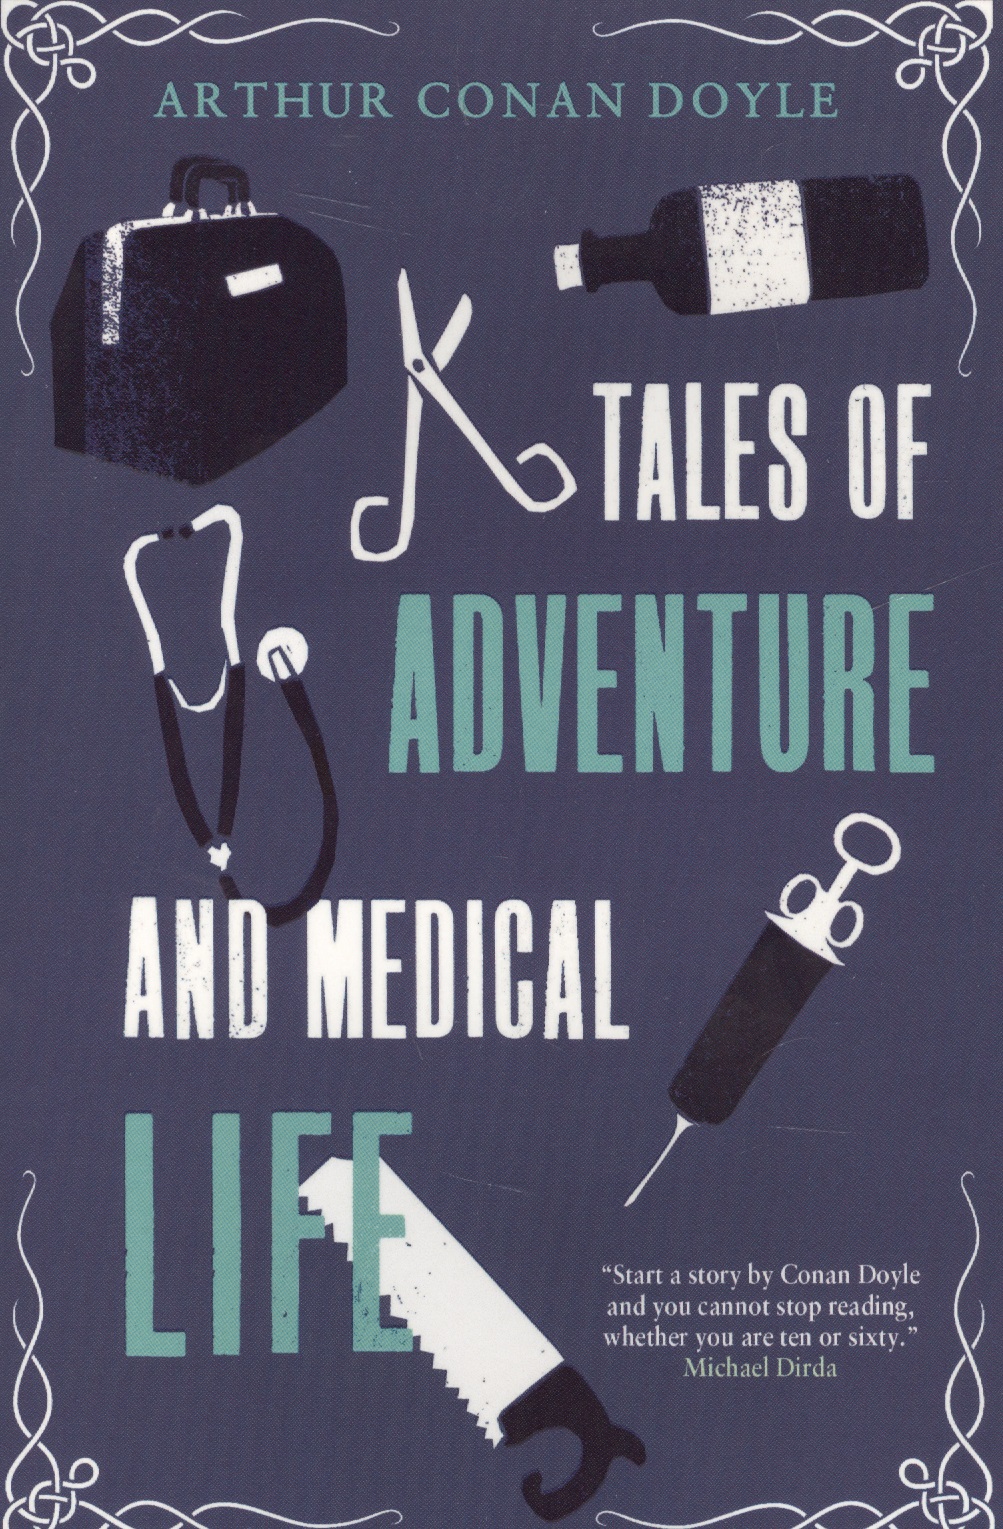 Tales of Adventure and Medical Life conan doyle a tales of long ago short story collections